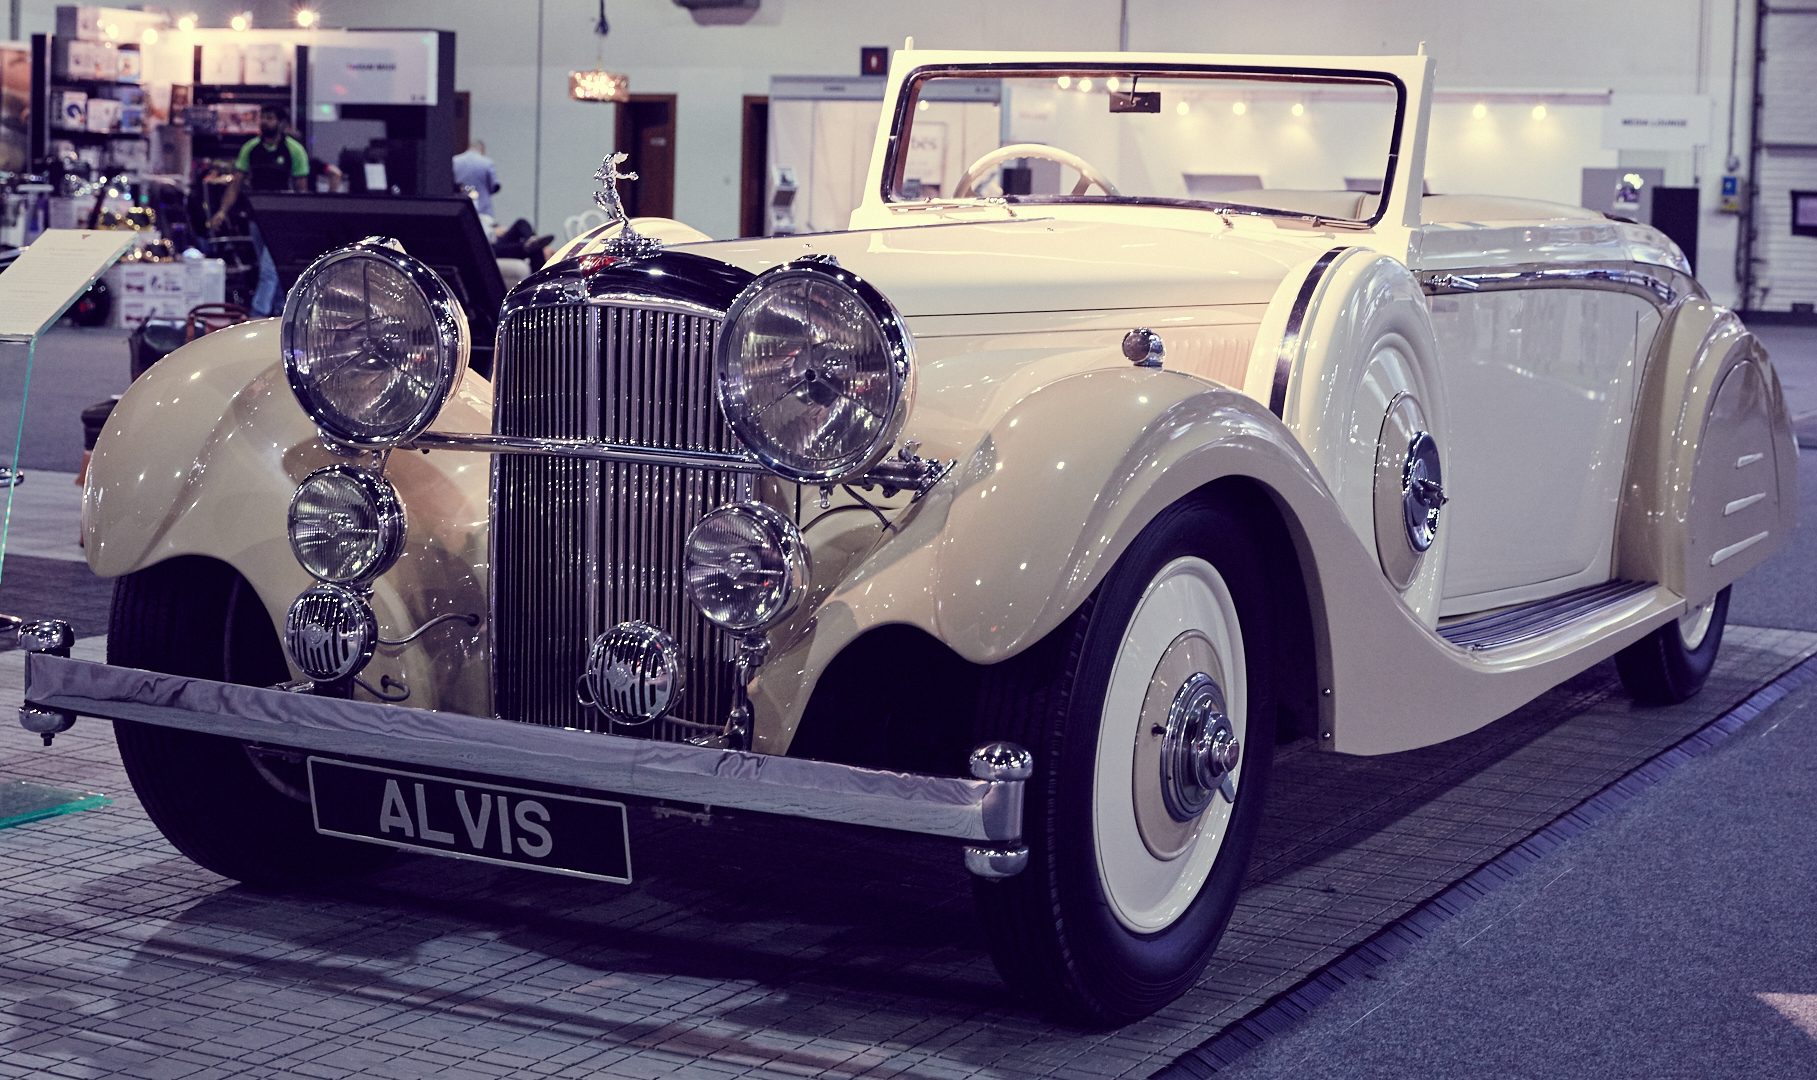 The One That Got Away: Alan Stote’s search for one of the world’s most beautiful Art Deco cars